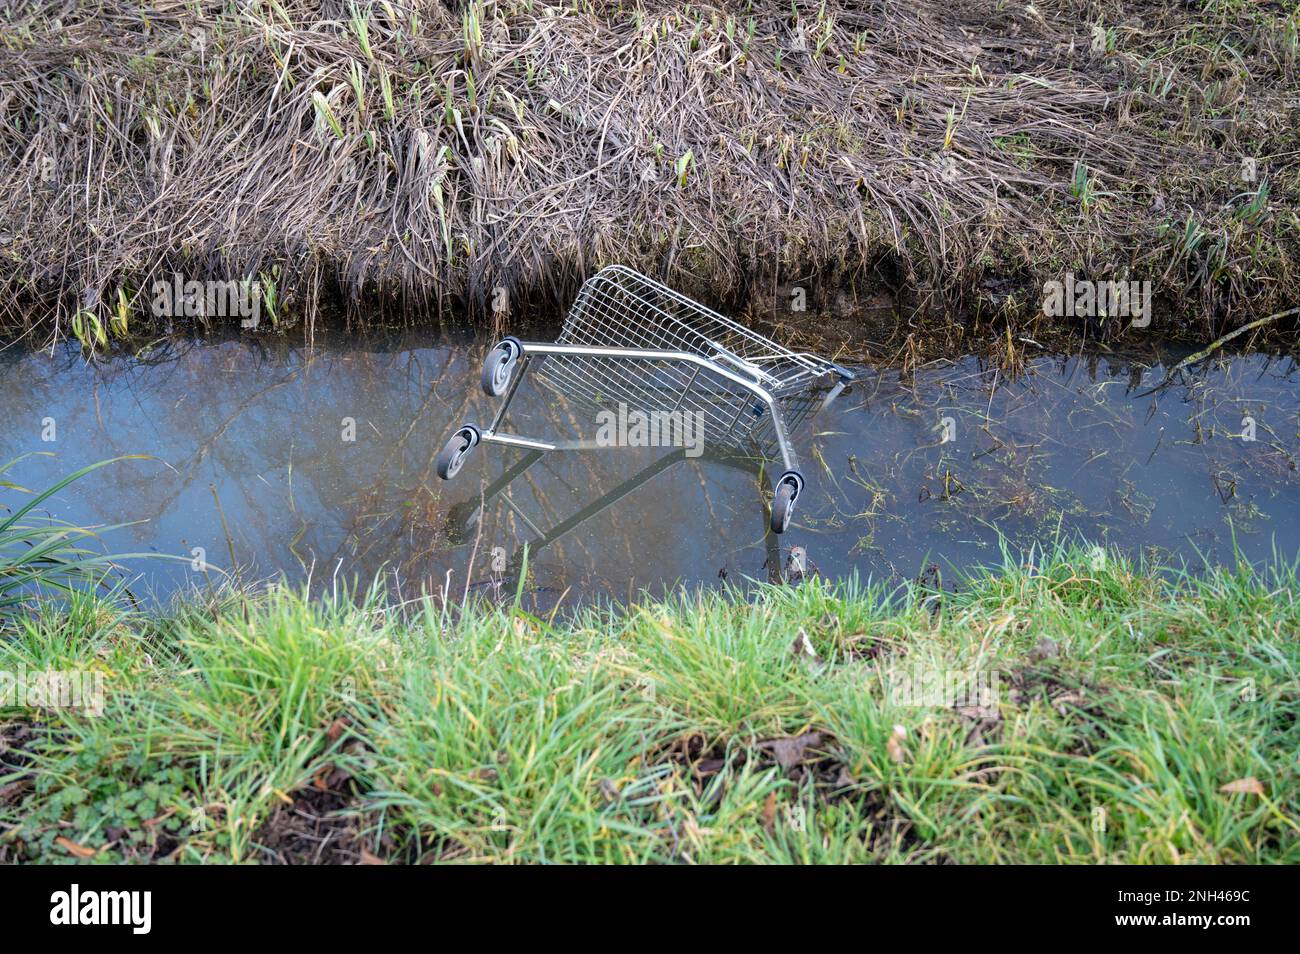 A supermaket shopping trolley dumped in a ditch full of water causing litter and damage to the environment. Stock Photo